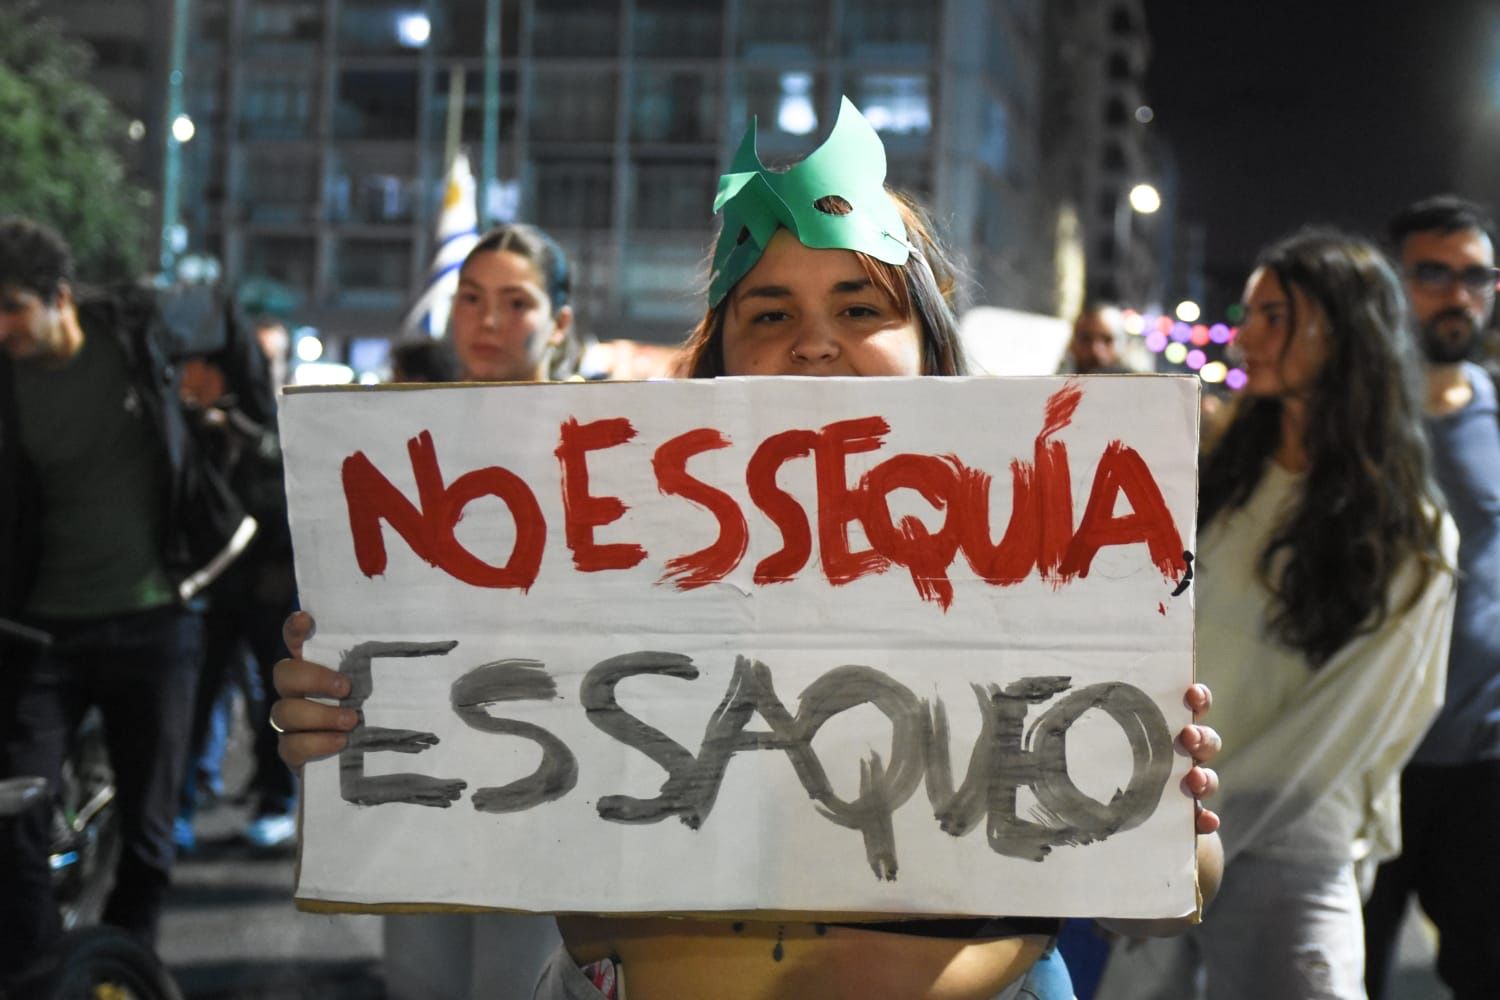 Demonstrator carrying a sign with text: No es sequía, es sequeo – it is not drought, it is robbery.